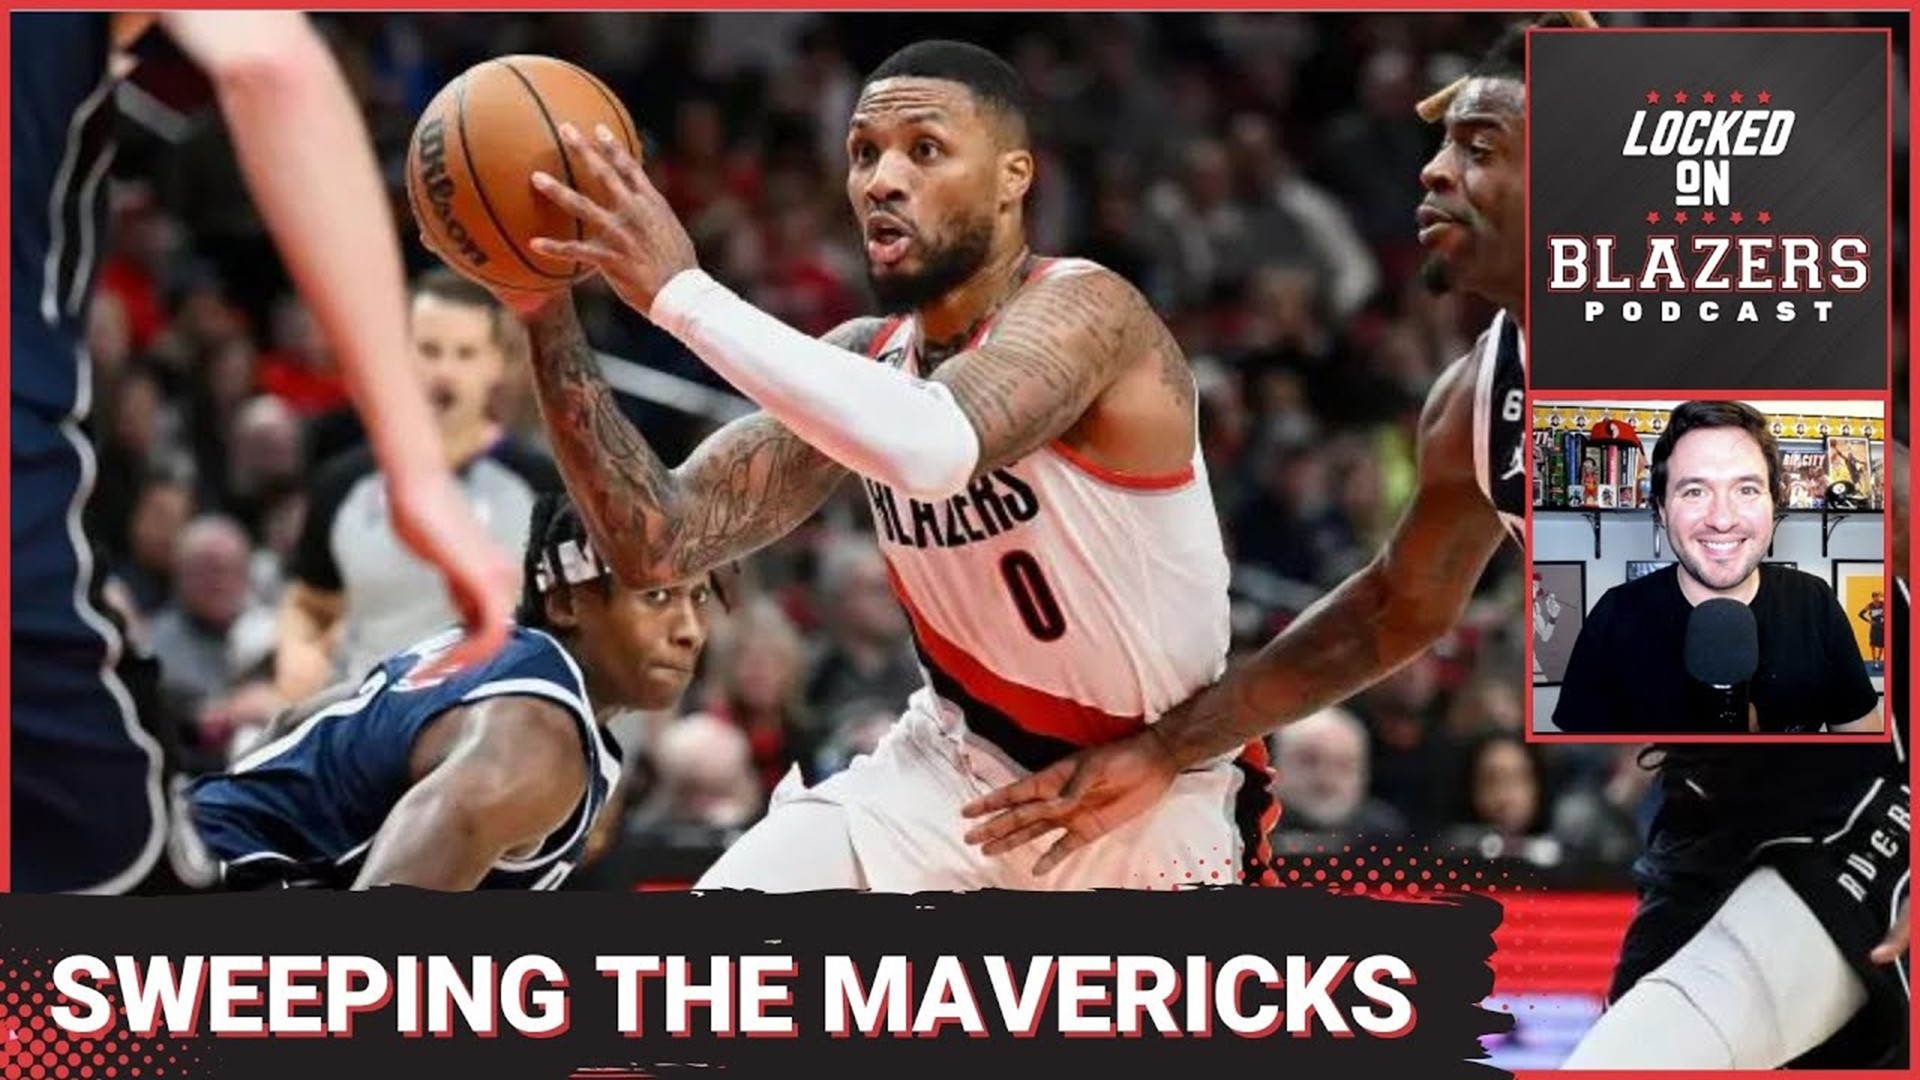 Damian Lillard has scored 30 in five straight games, the offense is finding its groove and the bench is better with Gary Payton II and the return of Nassir Little.